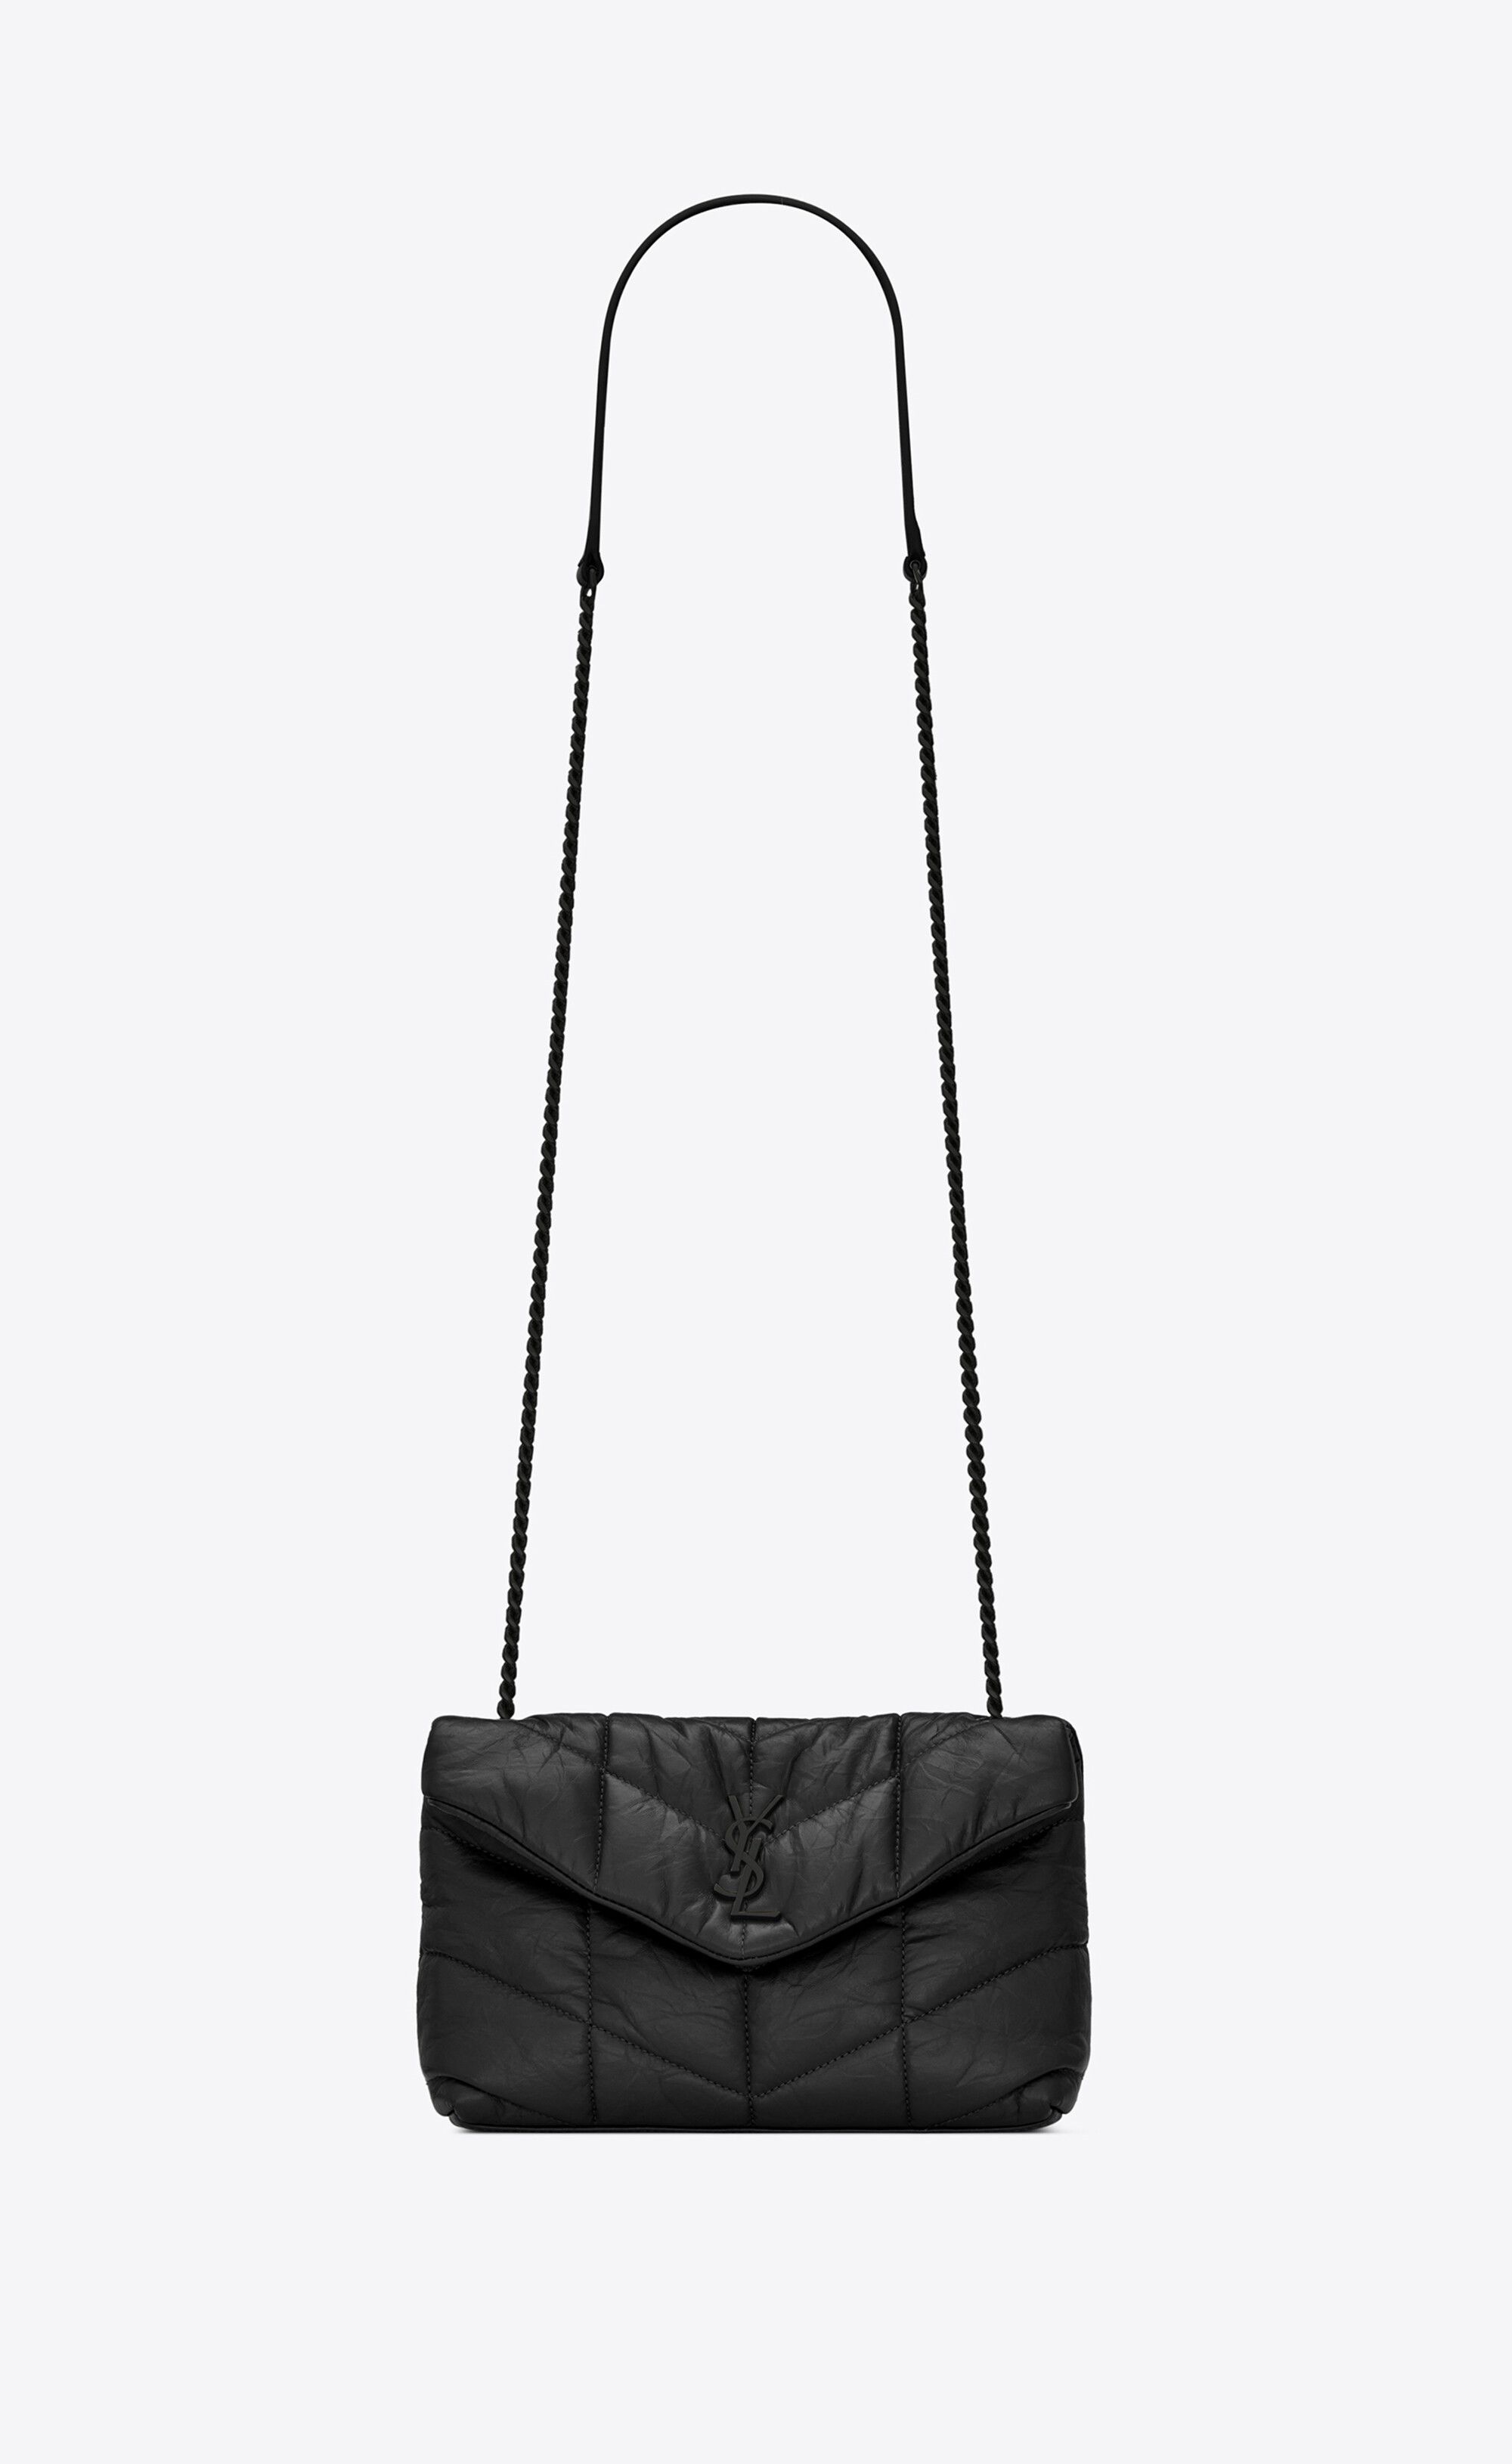 PUFFER toy bag in quilted wrinkled matte leather | Saint Laurent | YSL.com | Saint Laurent Inc. (Global)